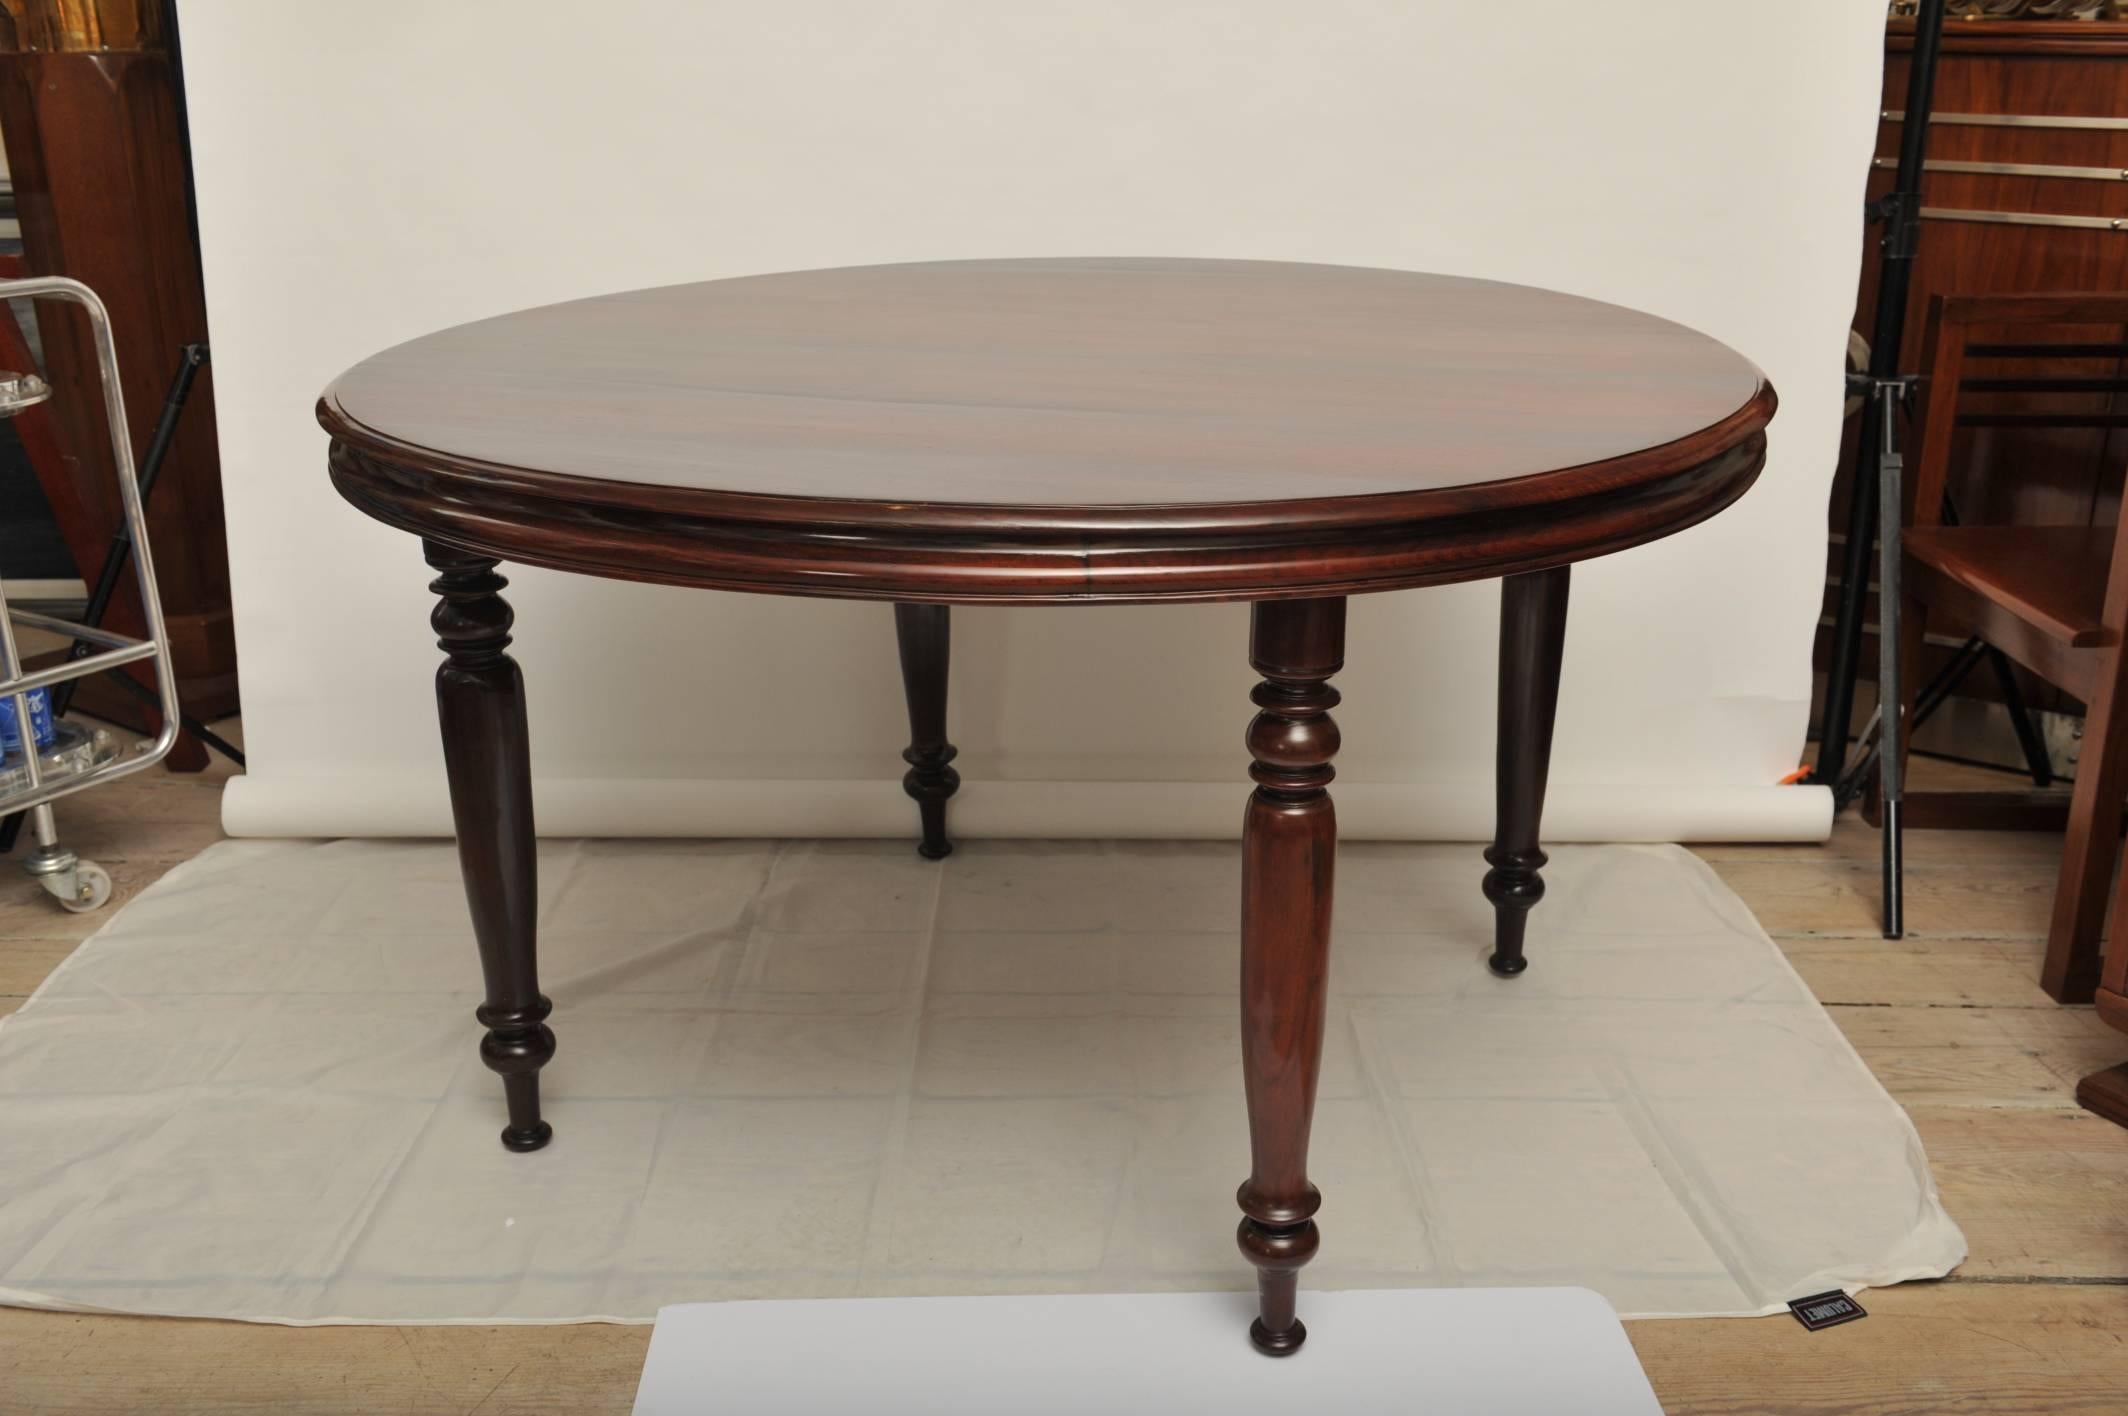 Elegant and rare British Campaign solid wood dining table. Reeded edges and turned legs, which unscrew from underneath the tabletop for easier transport, typical of the Campaign pieces, designed to store and travel. Refinished. Round dining tables